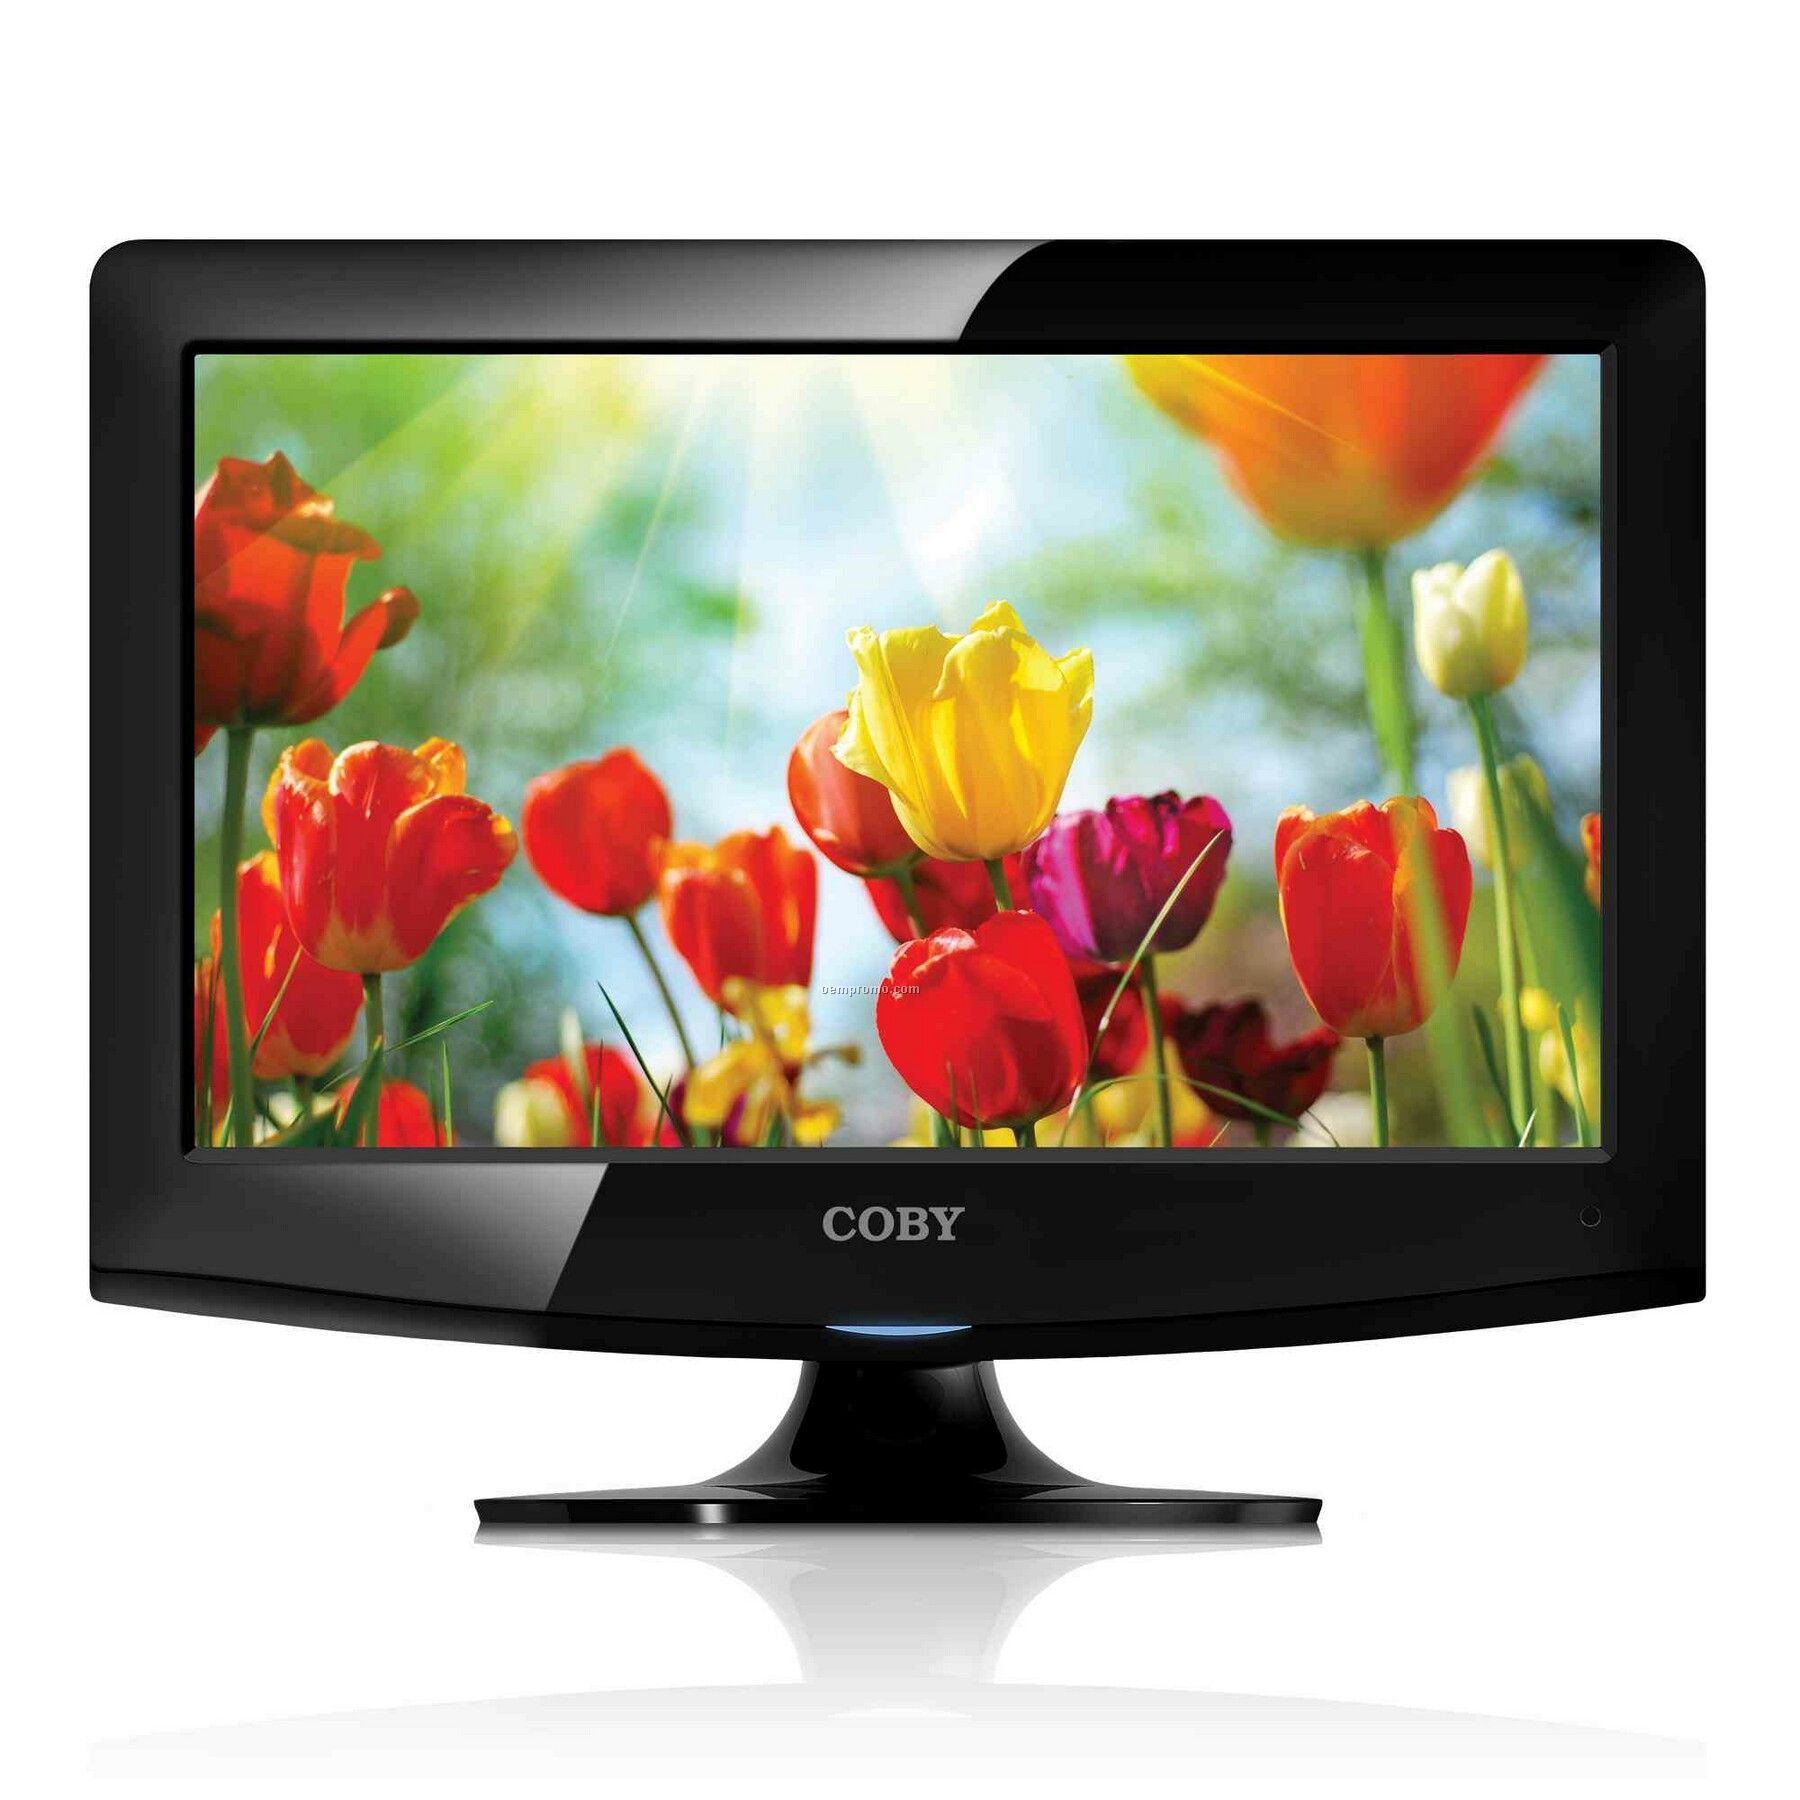 13" Class LED High-definition Tv